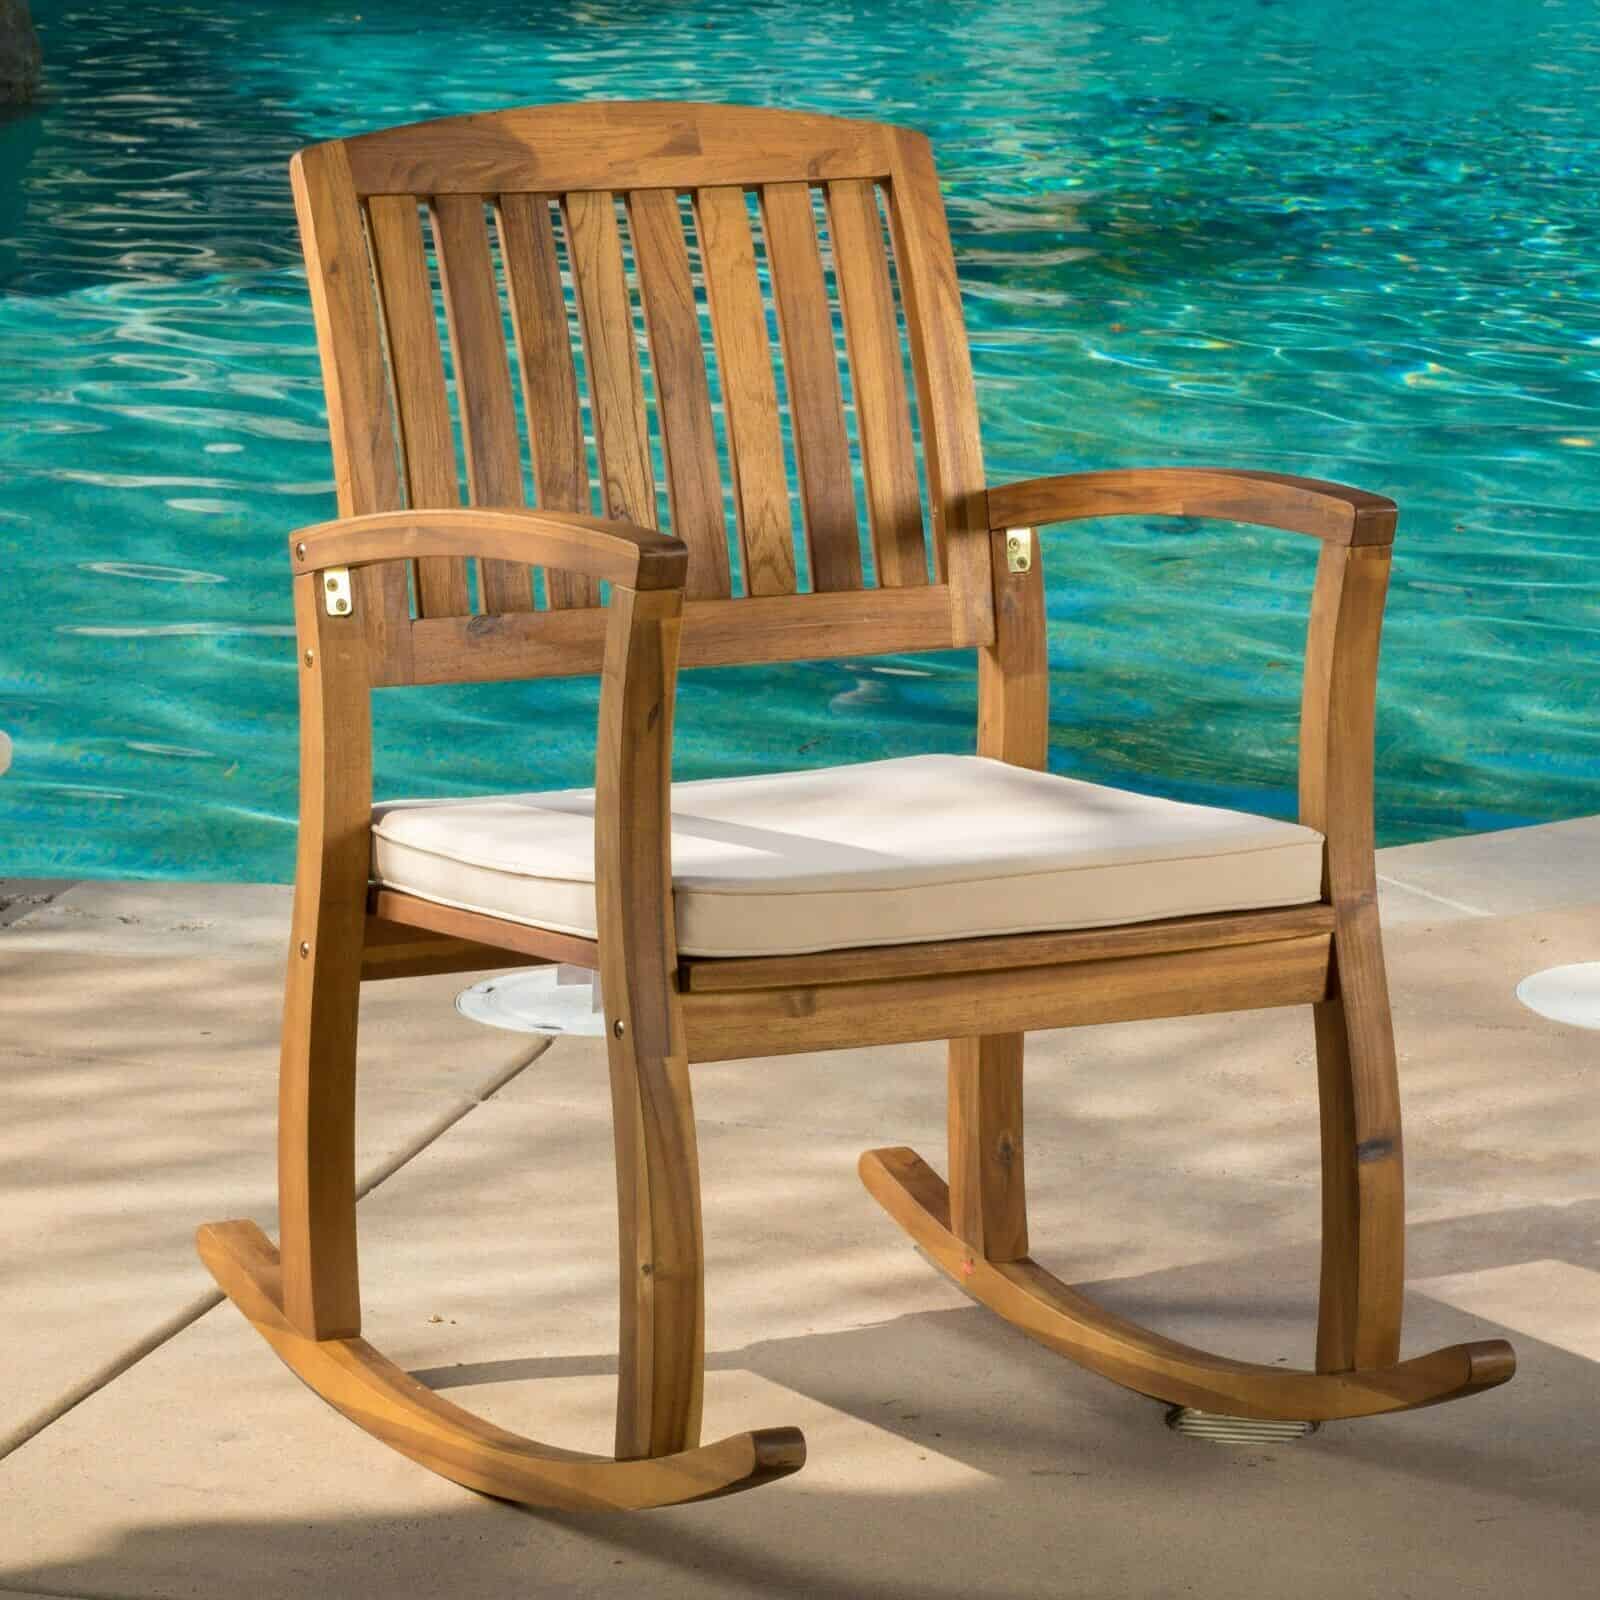 A wooden rocking chair in front of a pool.